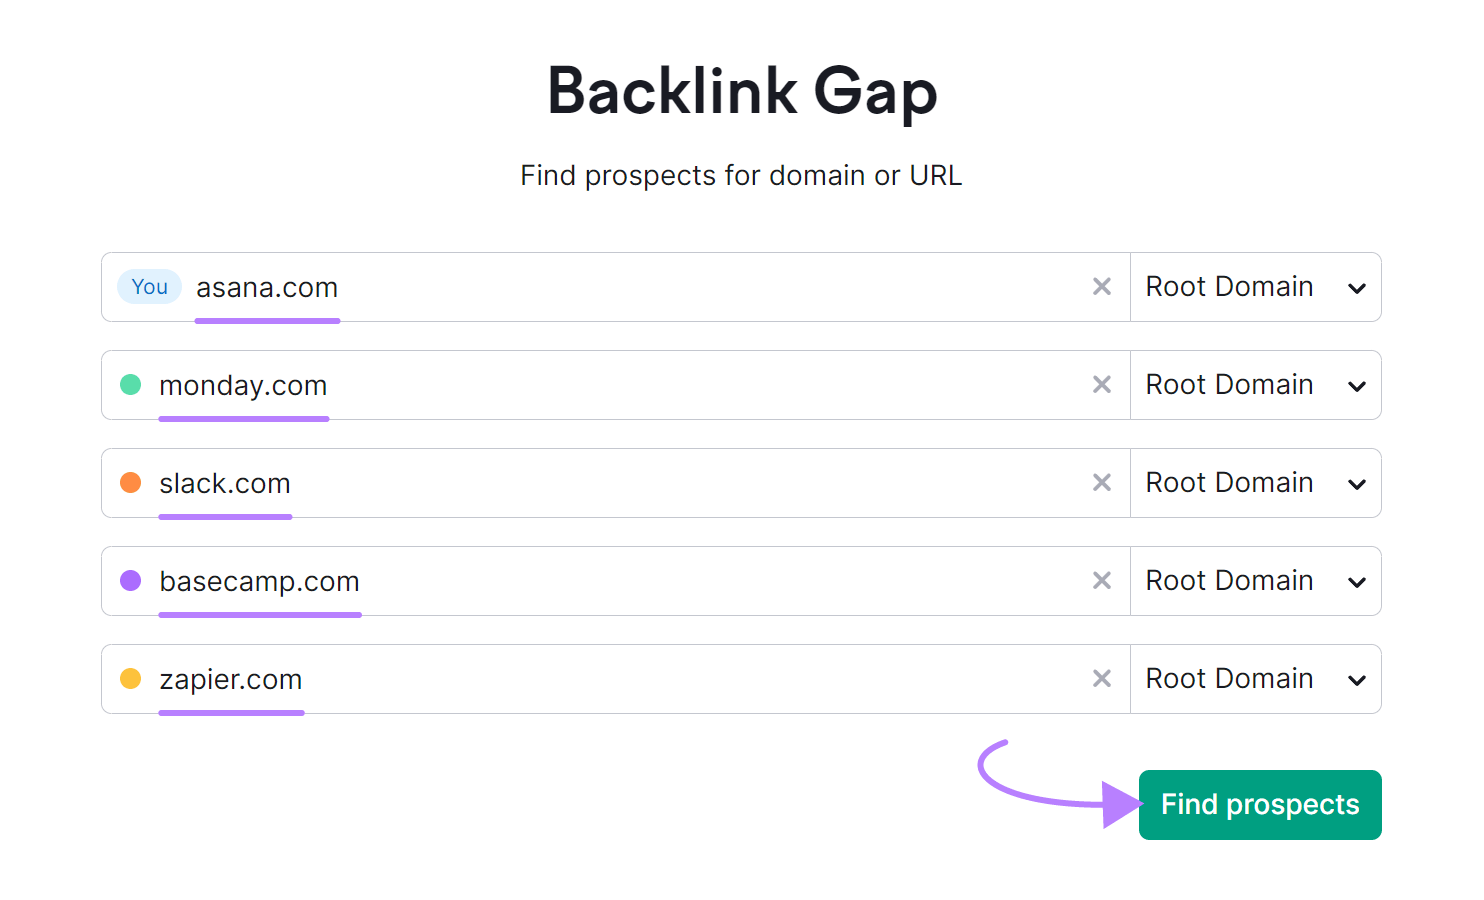 Domains entered into the Backlink Gap search box